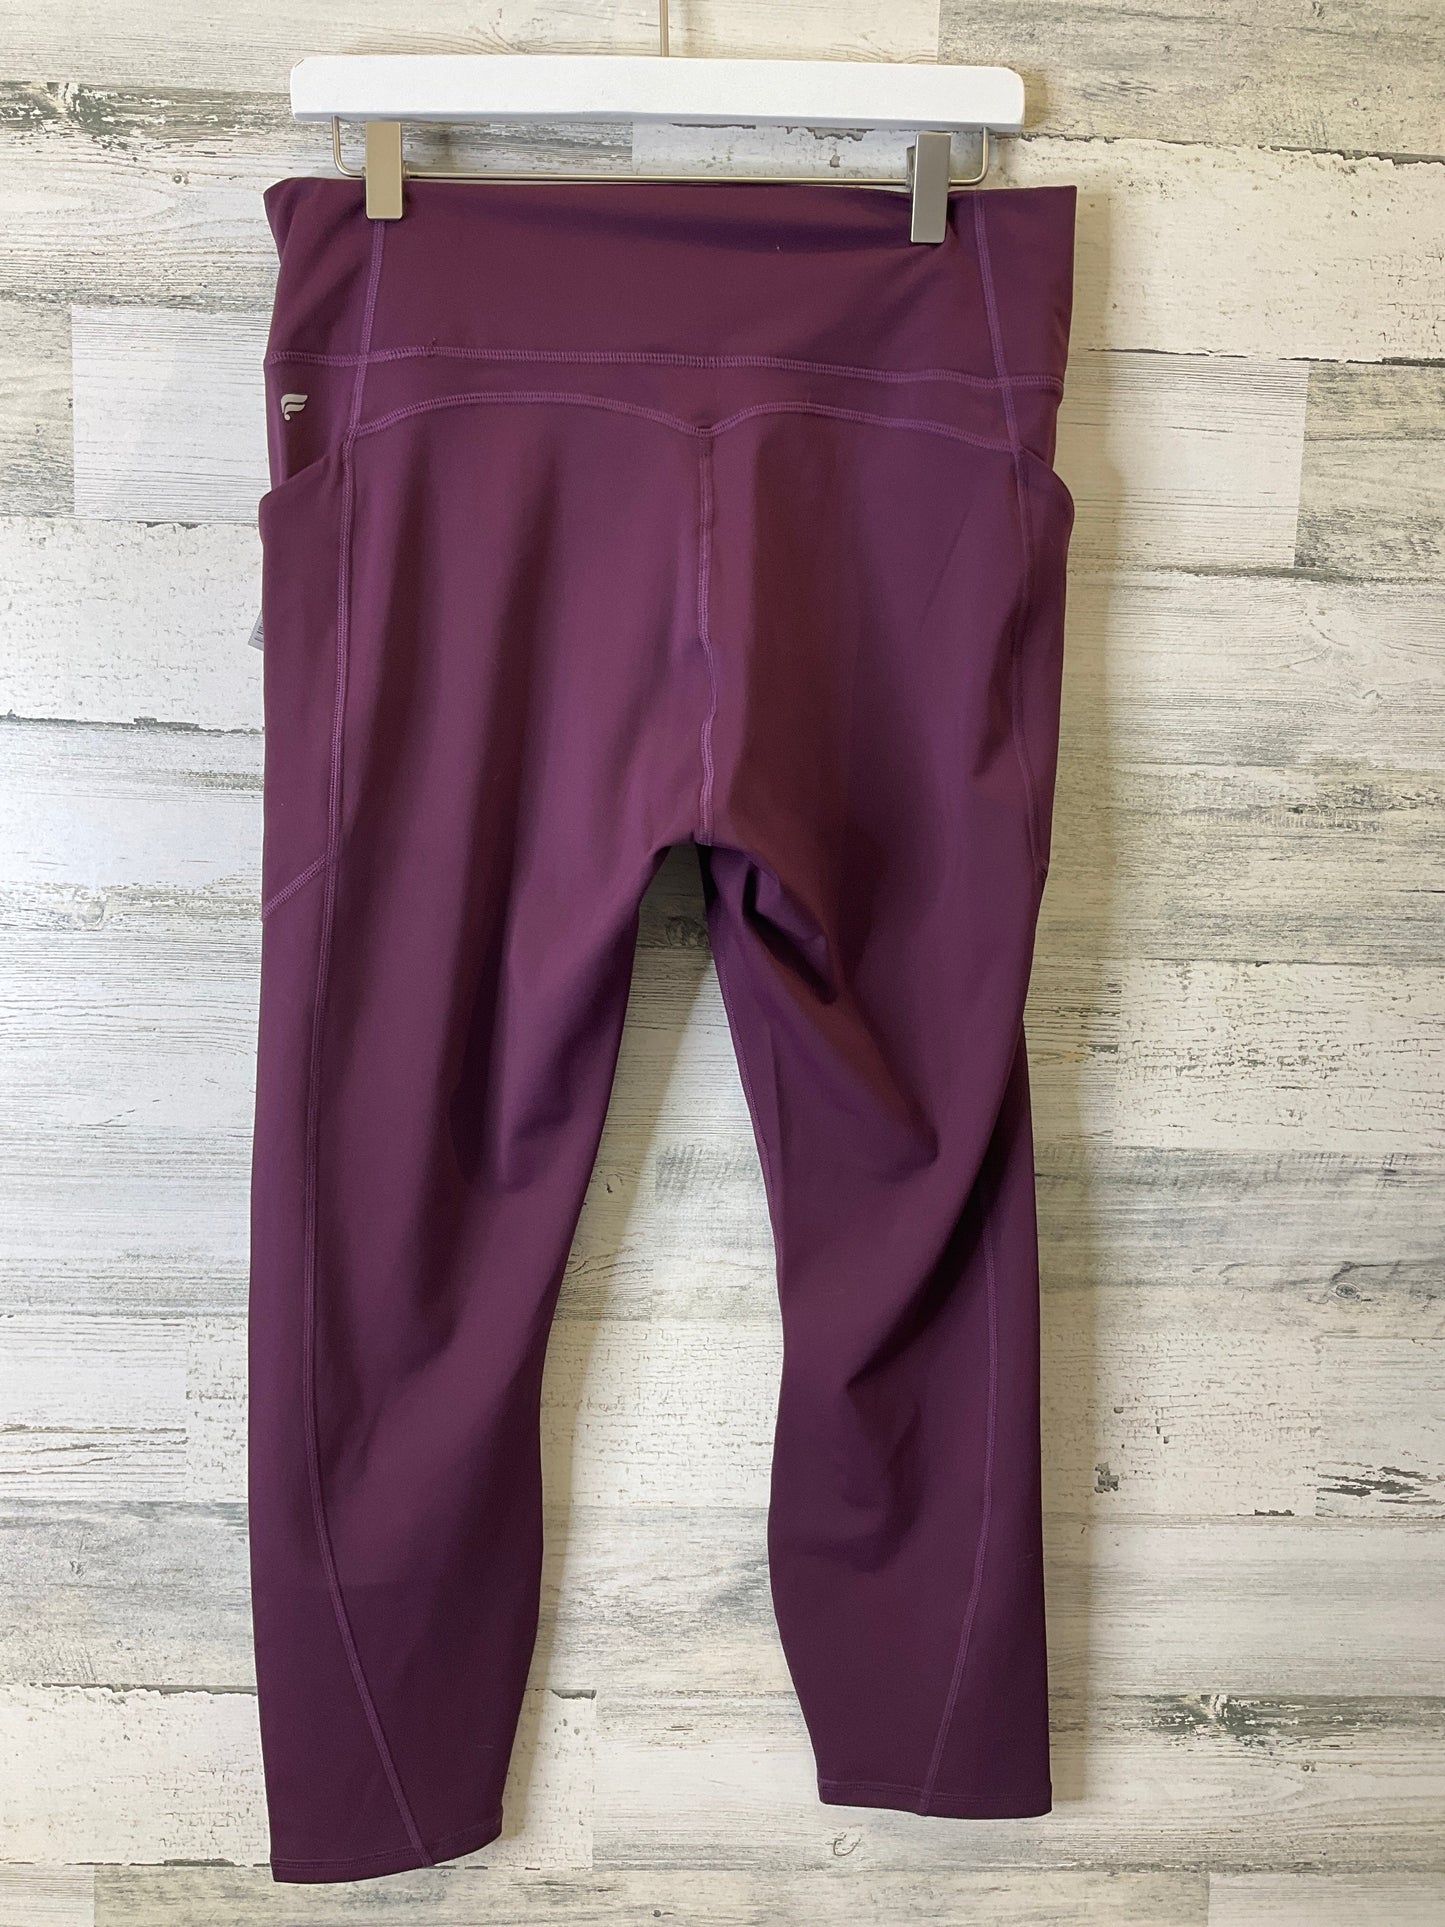 Athletic Leggings By Fabletics  Size: Xxl